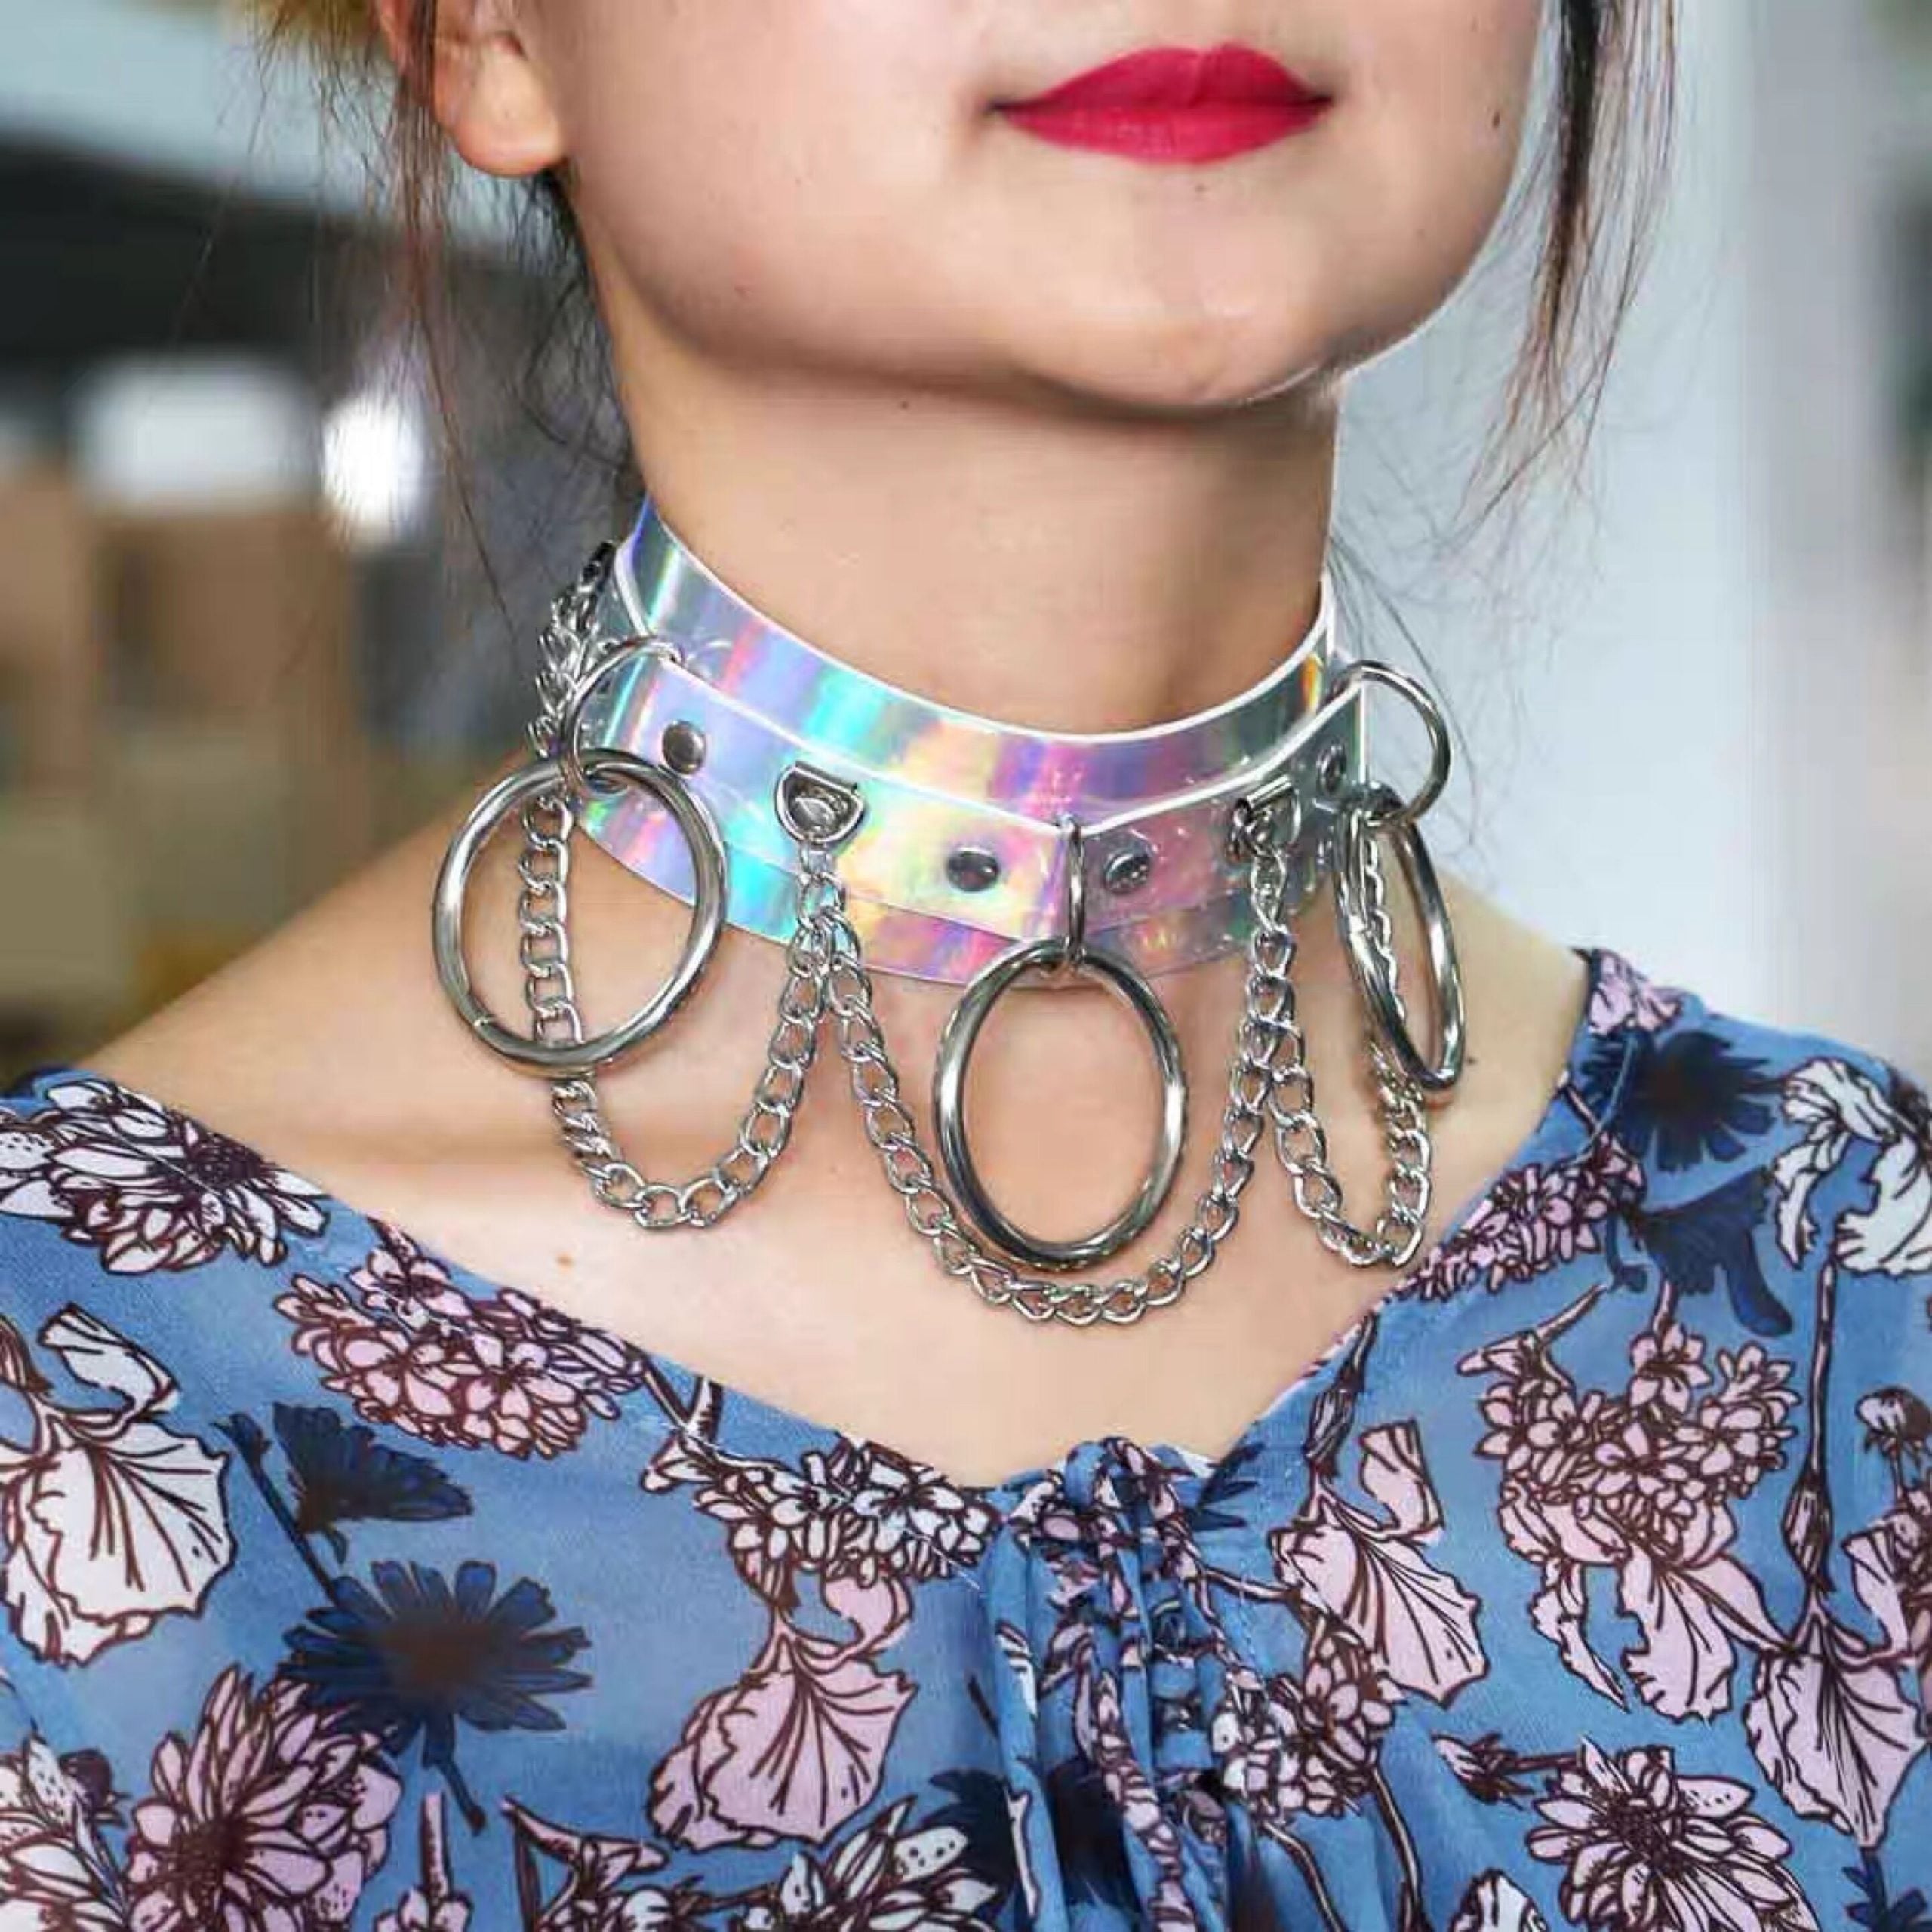 Holographic Chain & Rings Choker Necklace